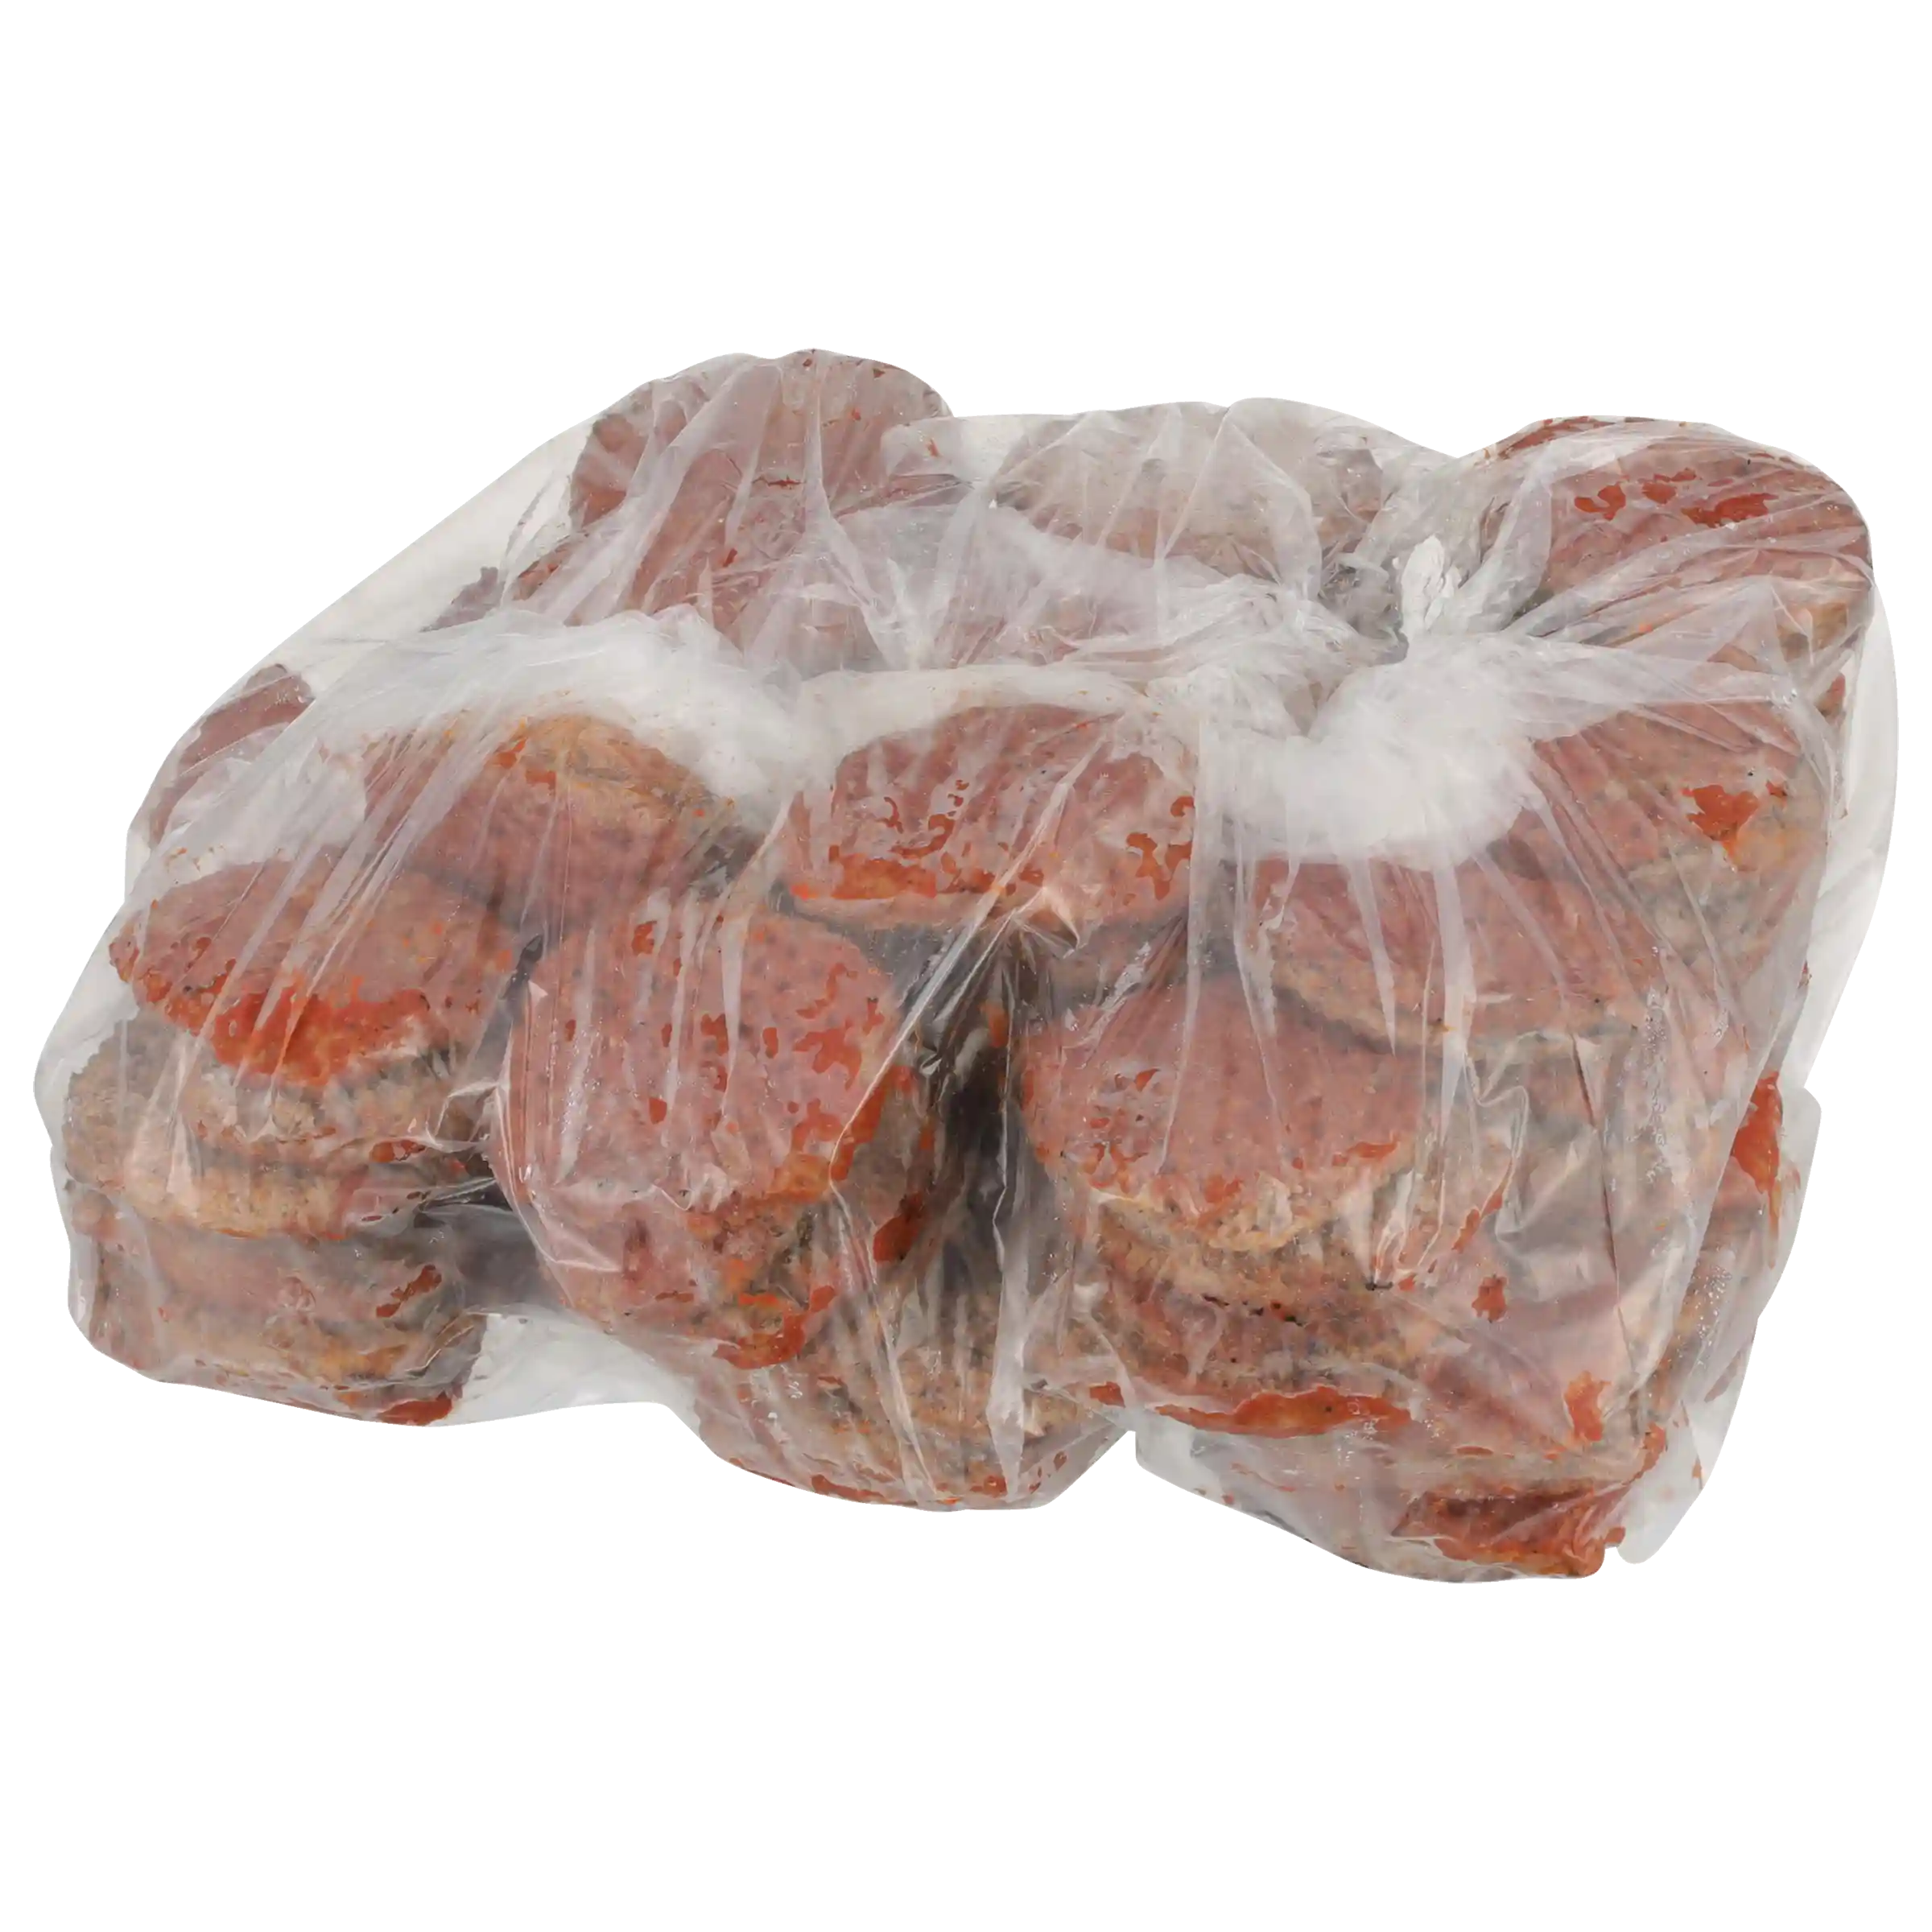 AdvancePierre™ Fully Cooked Beef Meatloaf Topped with Ketchup, 3.00 oz_image_21